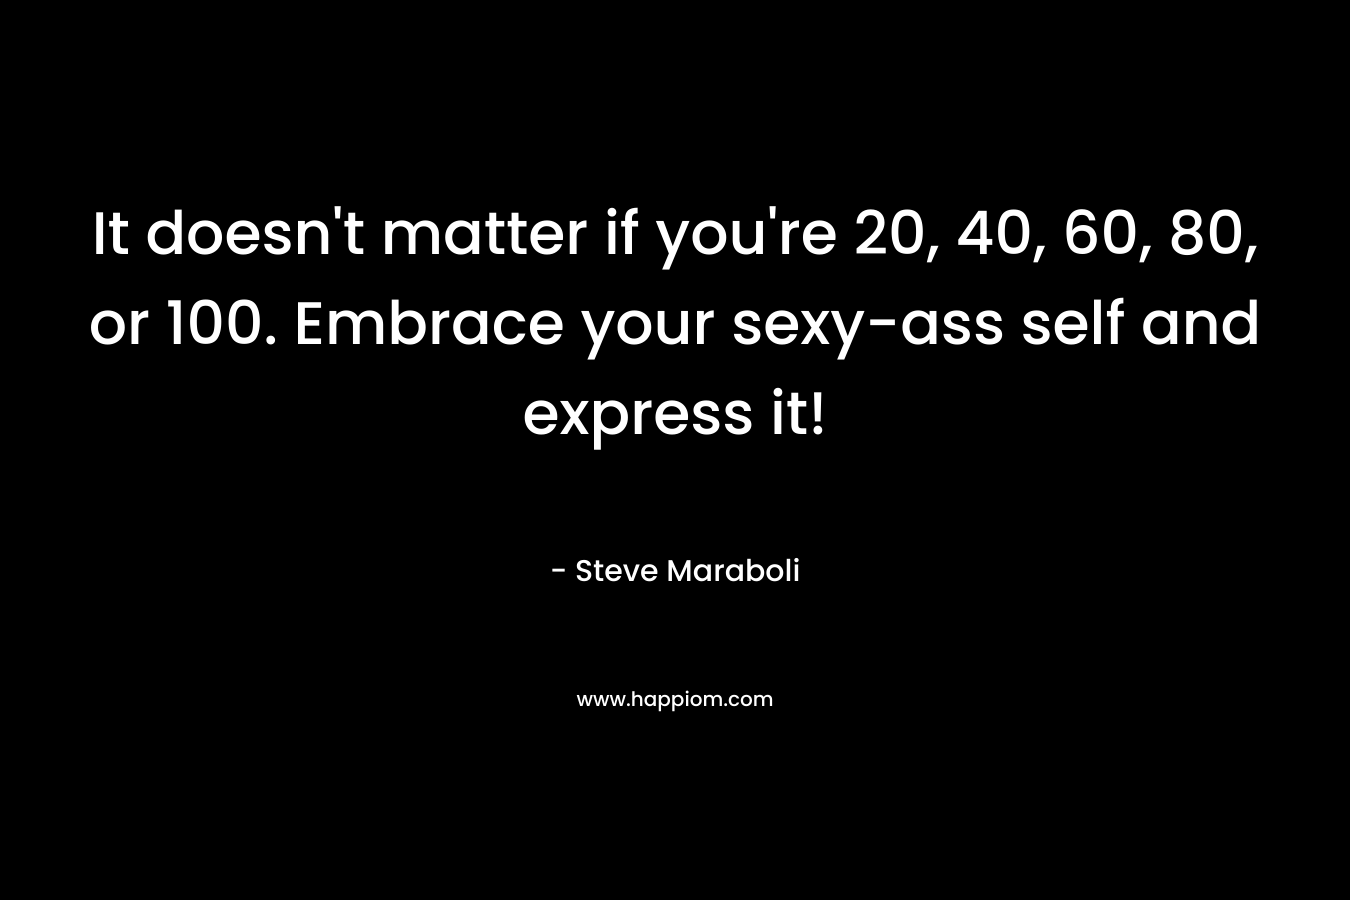 It doesn't matter if you're 20, 40, 60, 80, or 100. Embrace your sexy-ass self and express it!